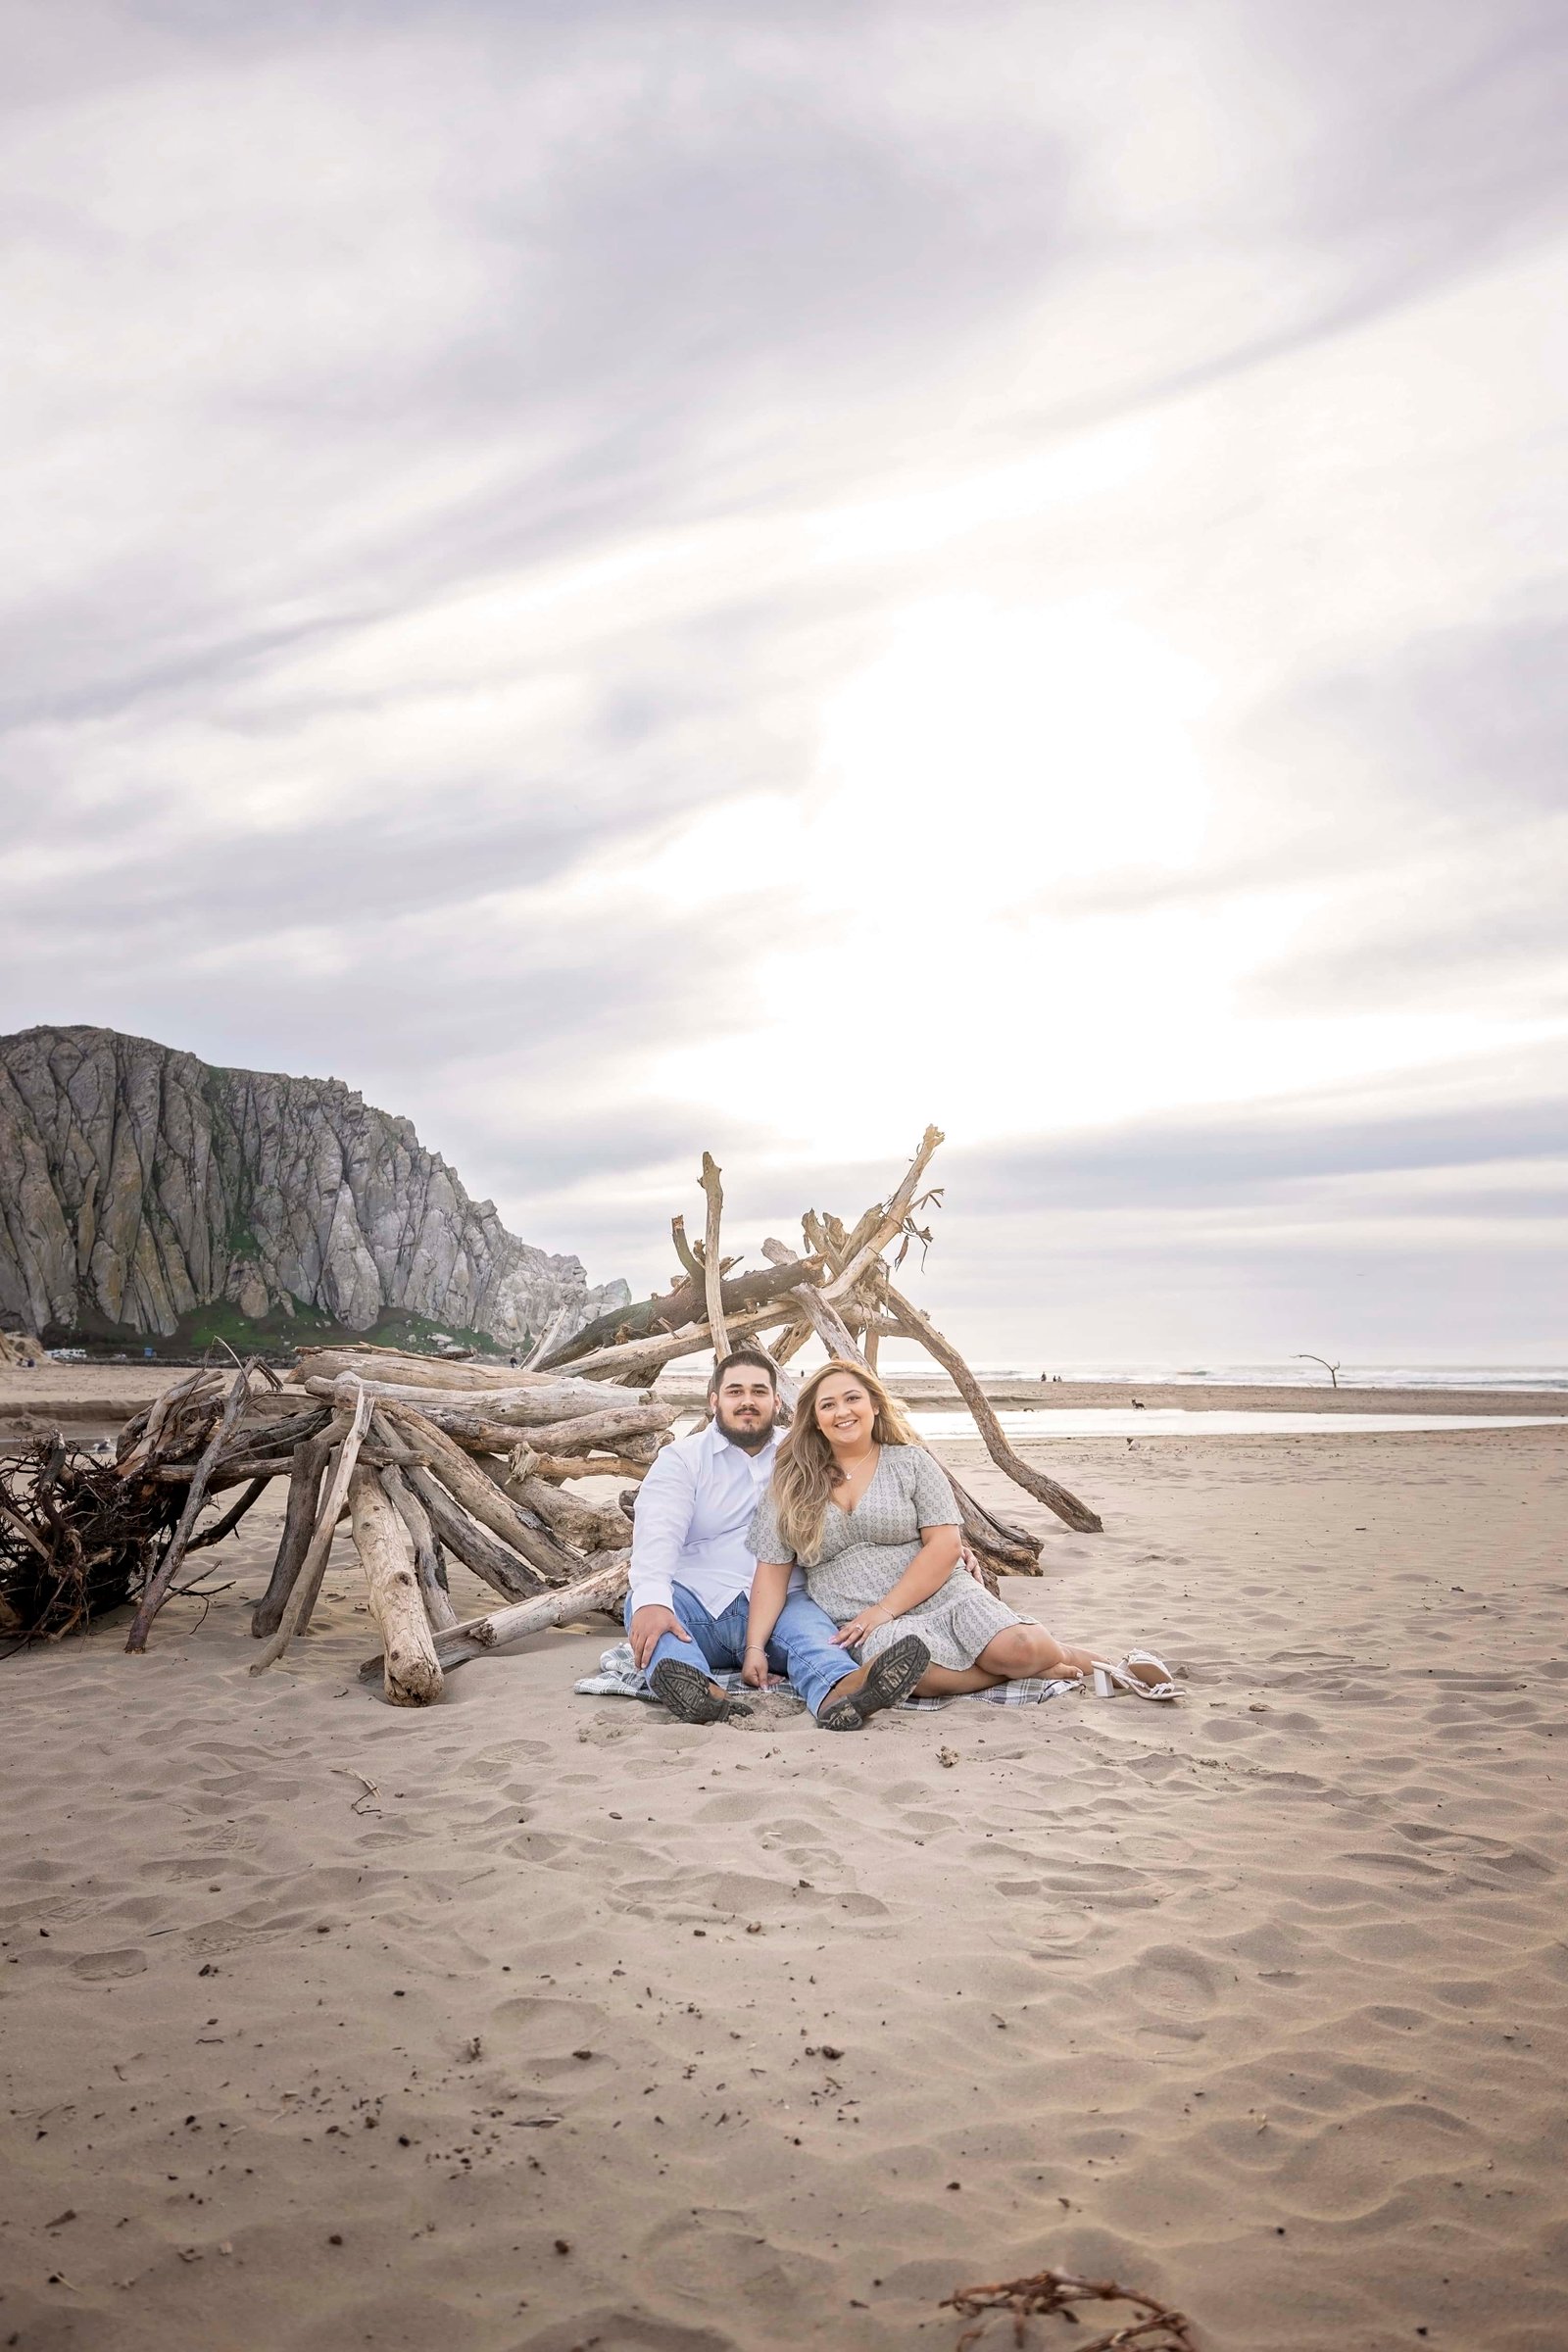 couple sitting in the sand by some driftwood at the beach